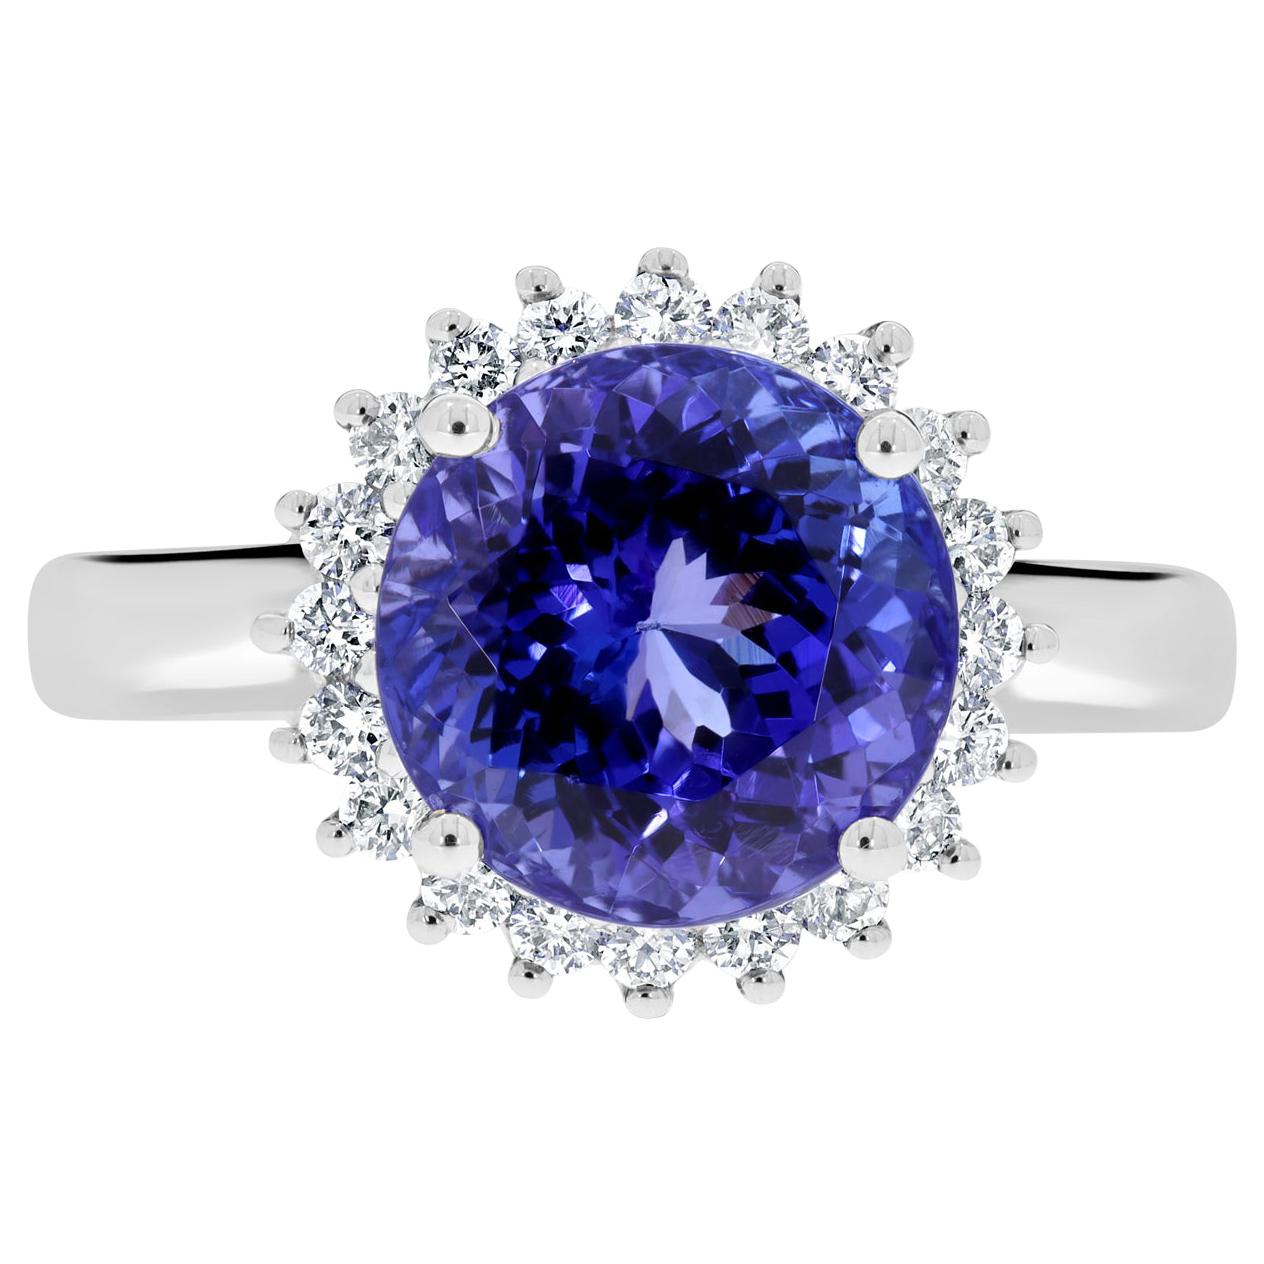 Gem Bleu 5.18ct Tanzanite Ring with 0.36 Tct Diamonds Set in 18kt White Gold For Sale